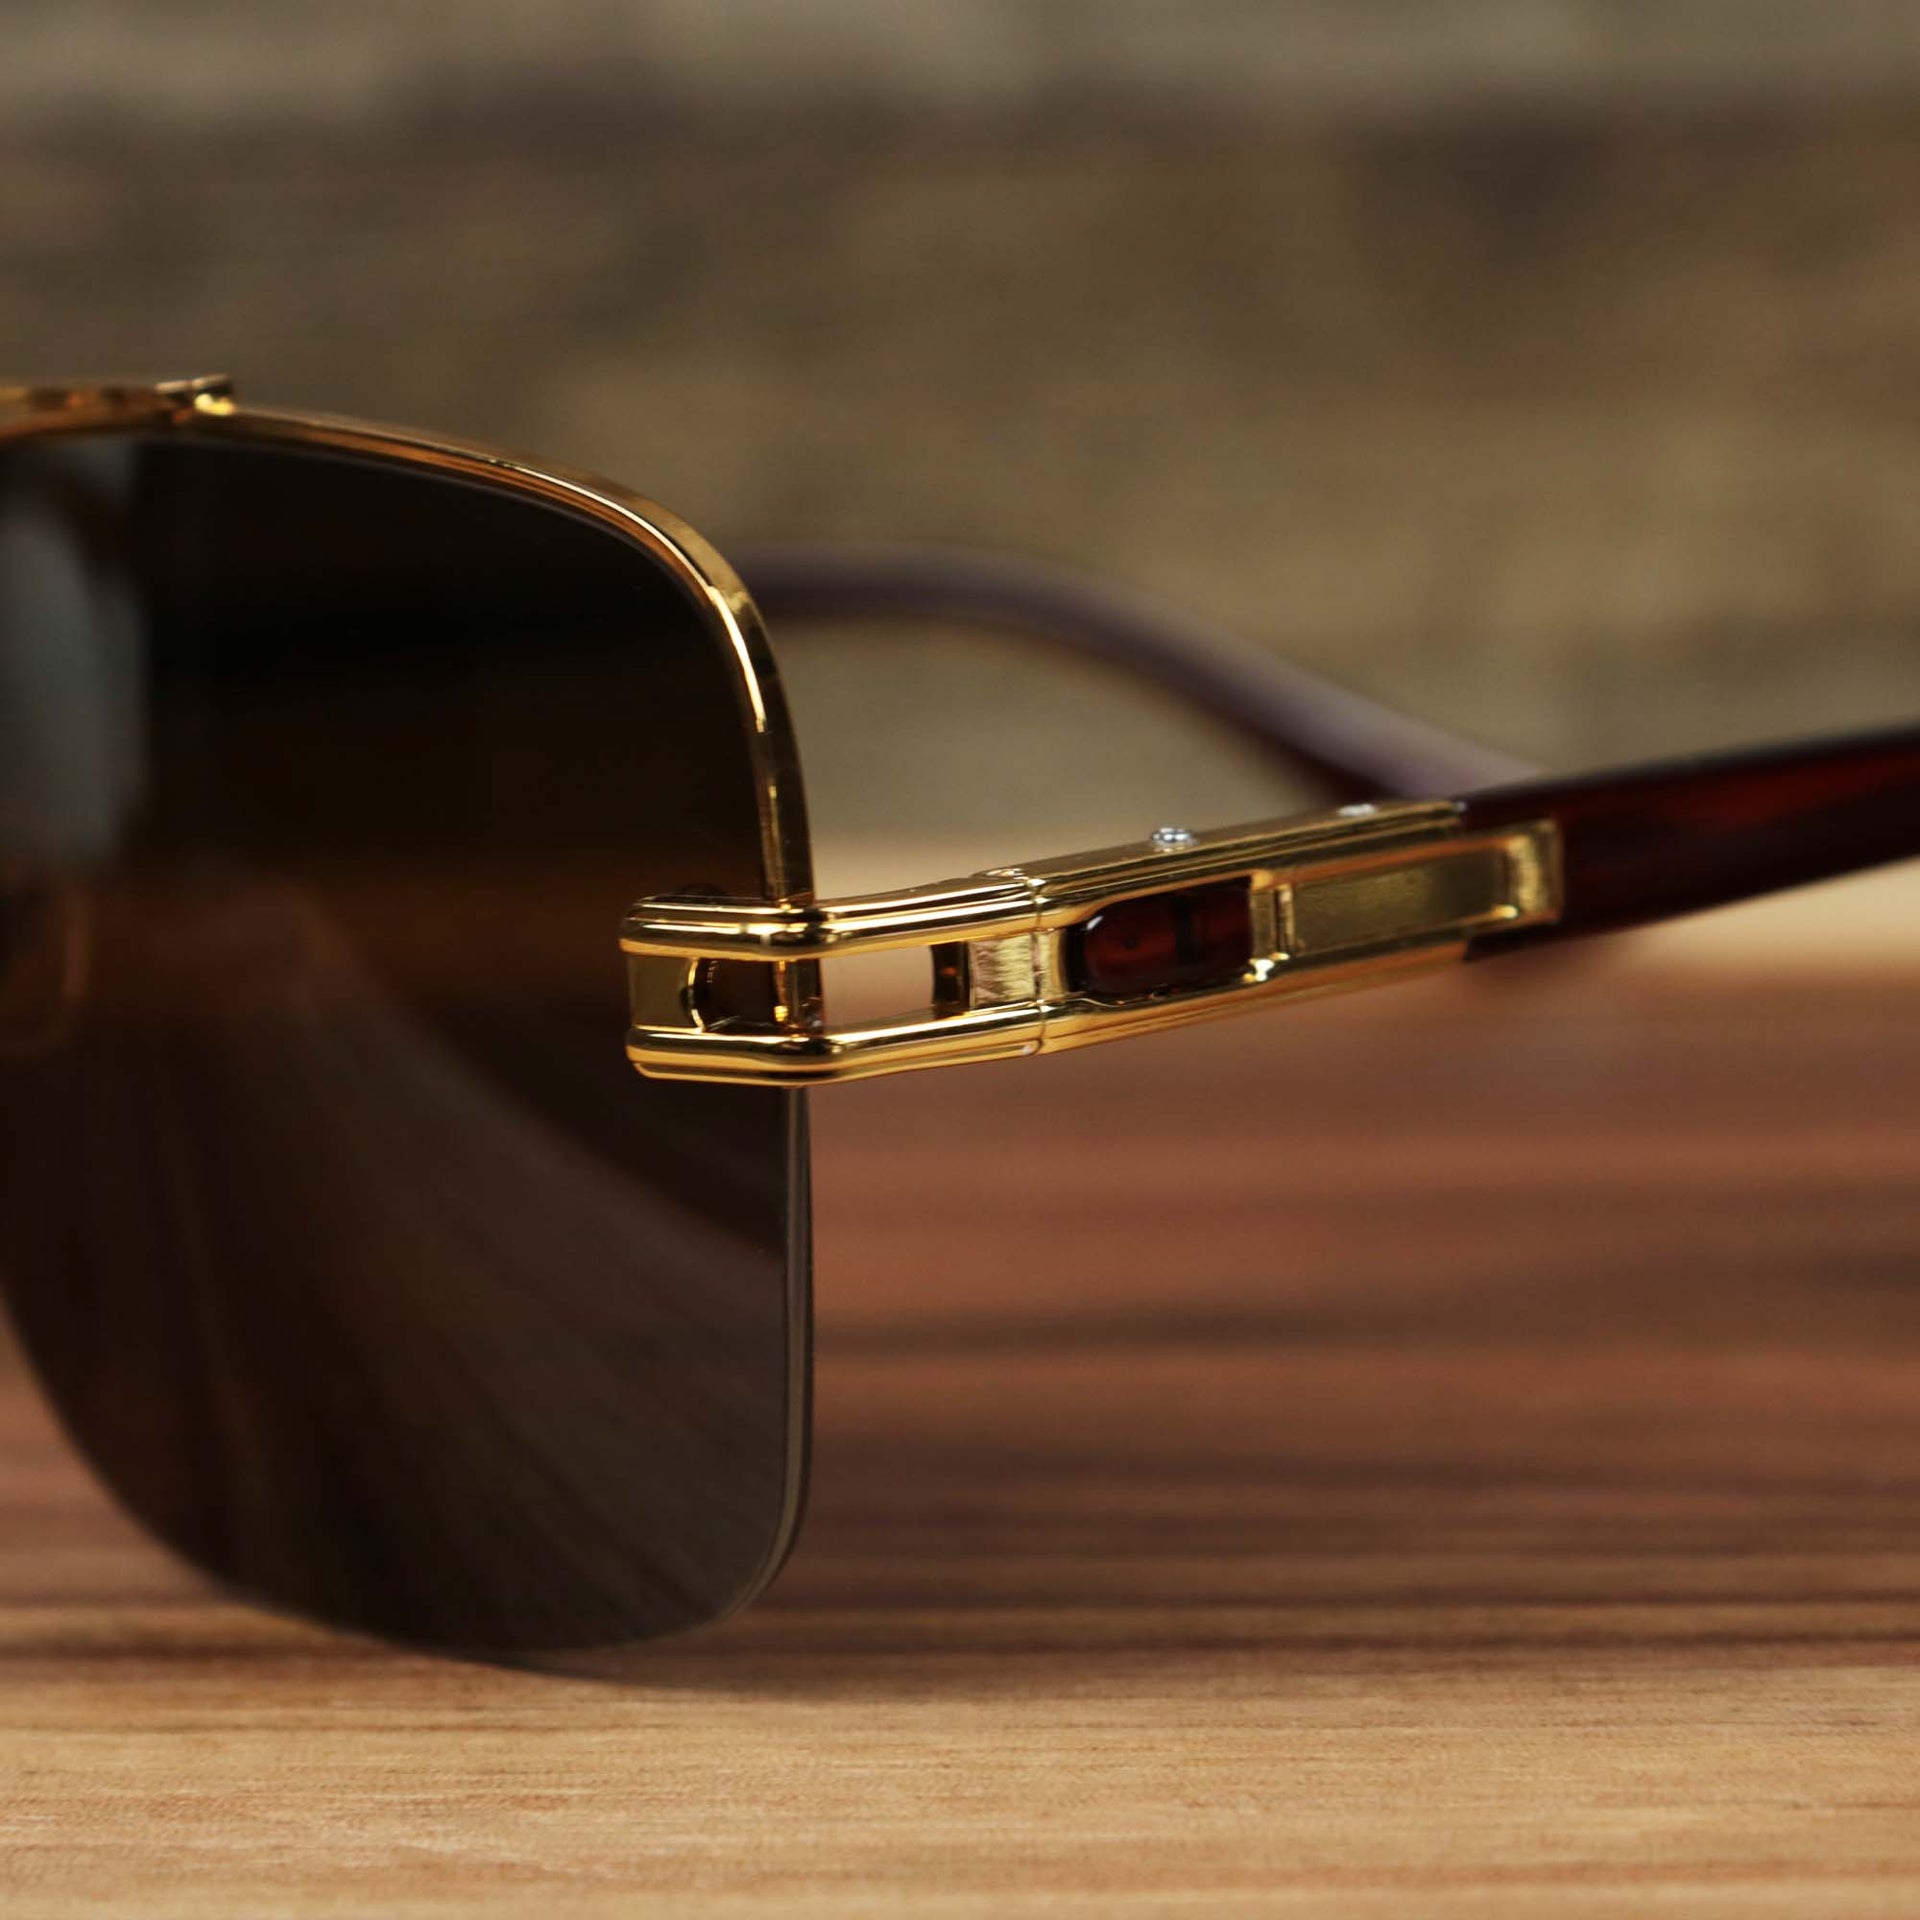 The hinge on the Round Rectangle Frame Black Lens Sunglasses with Gold Frame